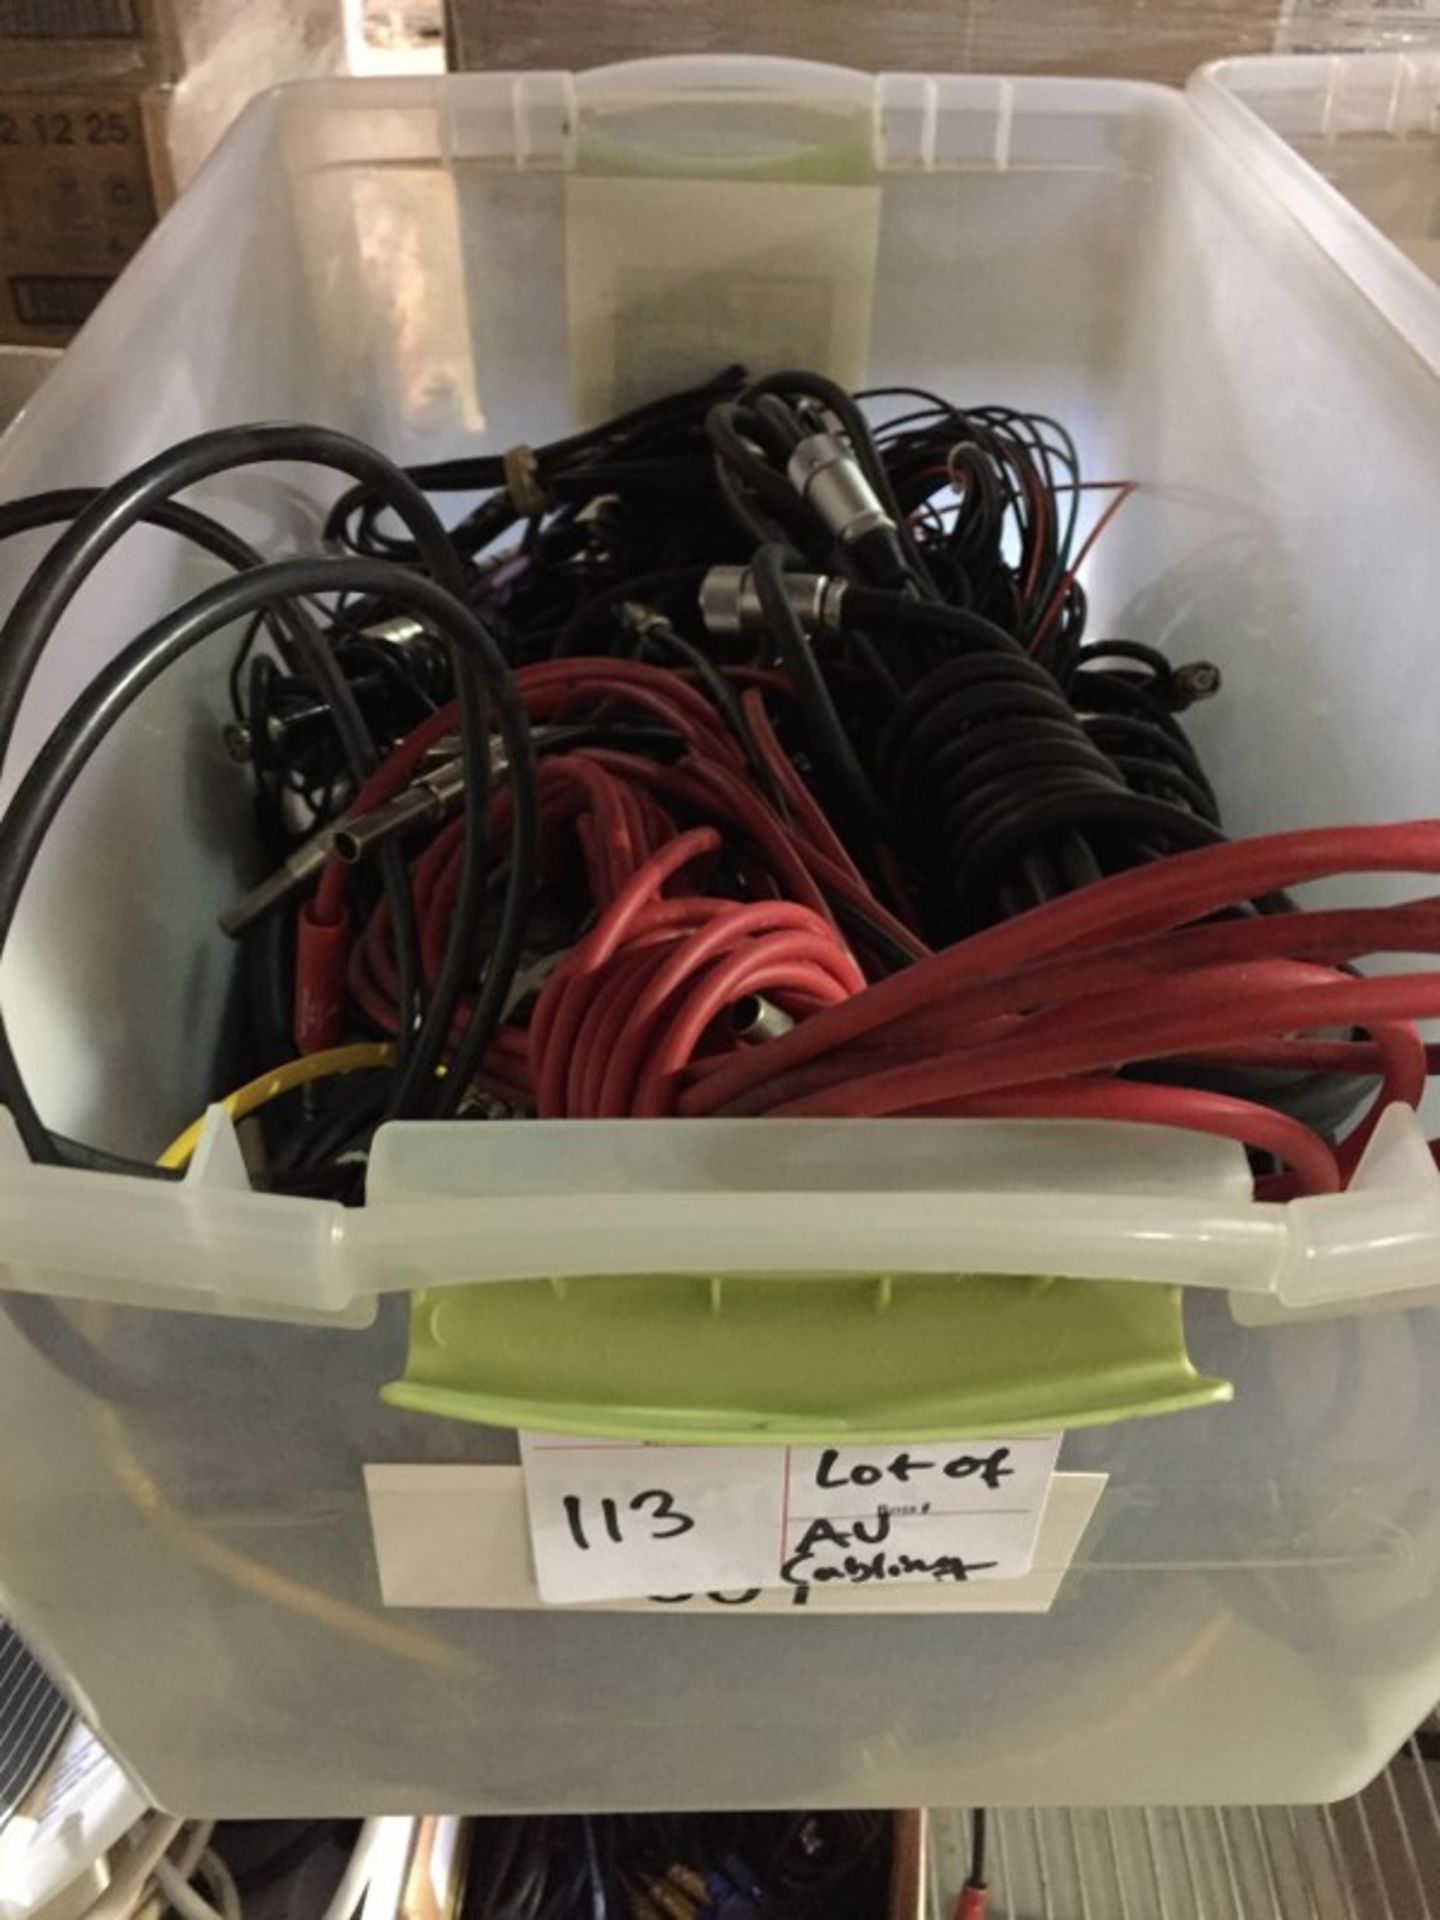 LOT OF AUDIO/VIDEO CABLES